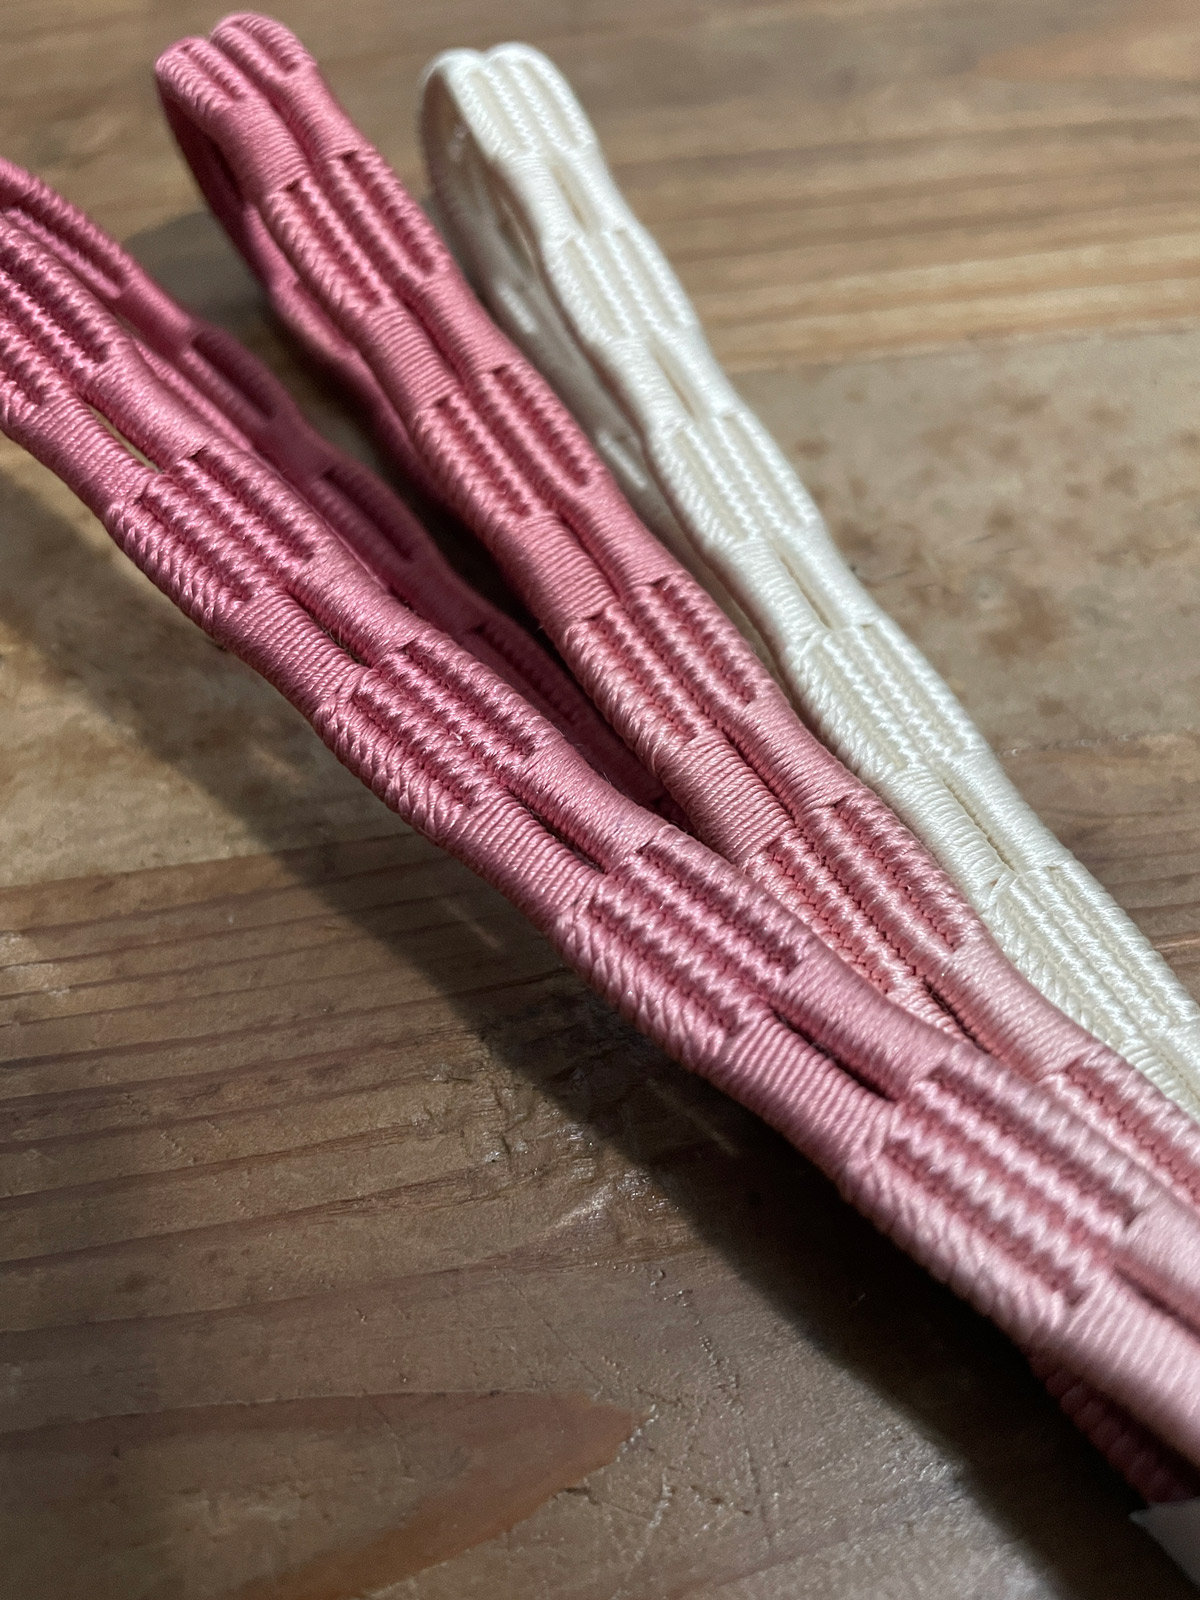 Refined woven silk Obijime cord in pink and white gradient